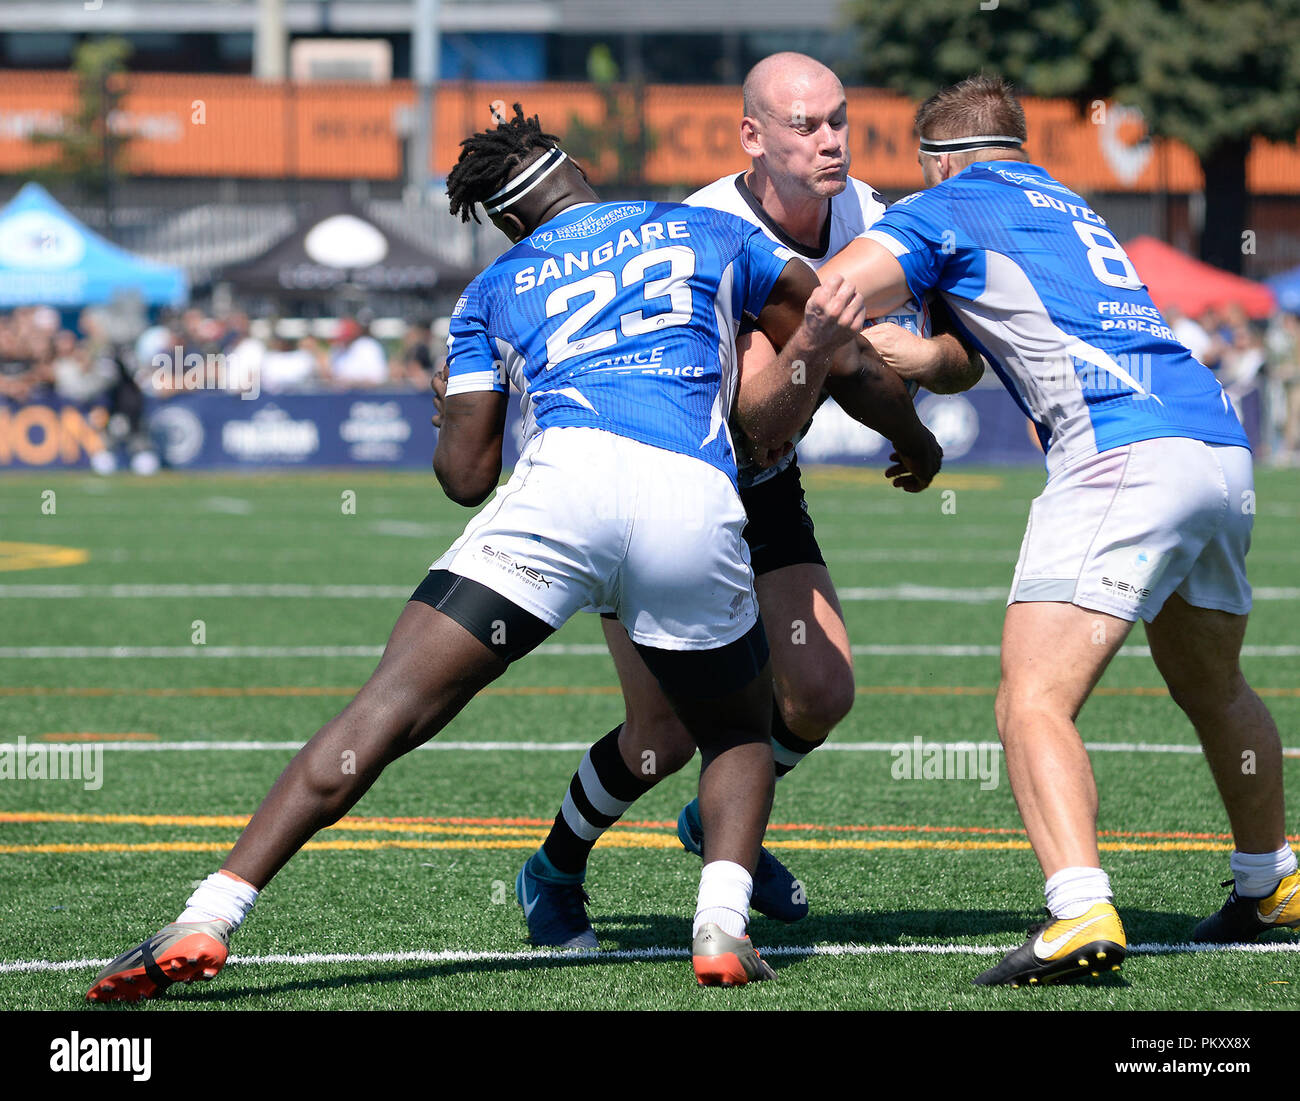 Lamport Stadium, Toronto, Ontario, Canada, 15th September 2018.   Jack Buchanan of Toronto Wolfpack on the attack against Toulouse Olympique during Toronto Wolfpack v Toulouse Olympique in the Super 8's The Qualifiers.   Credit: Touchlinepics/Alamy Live News Stock Photo